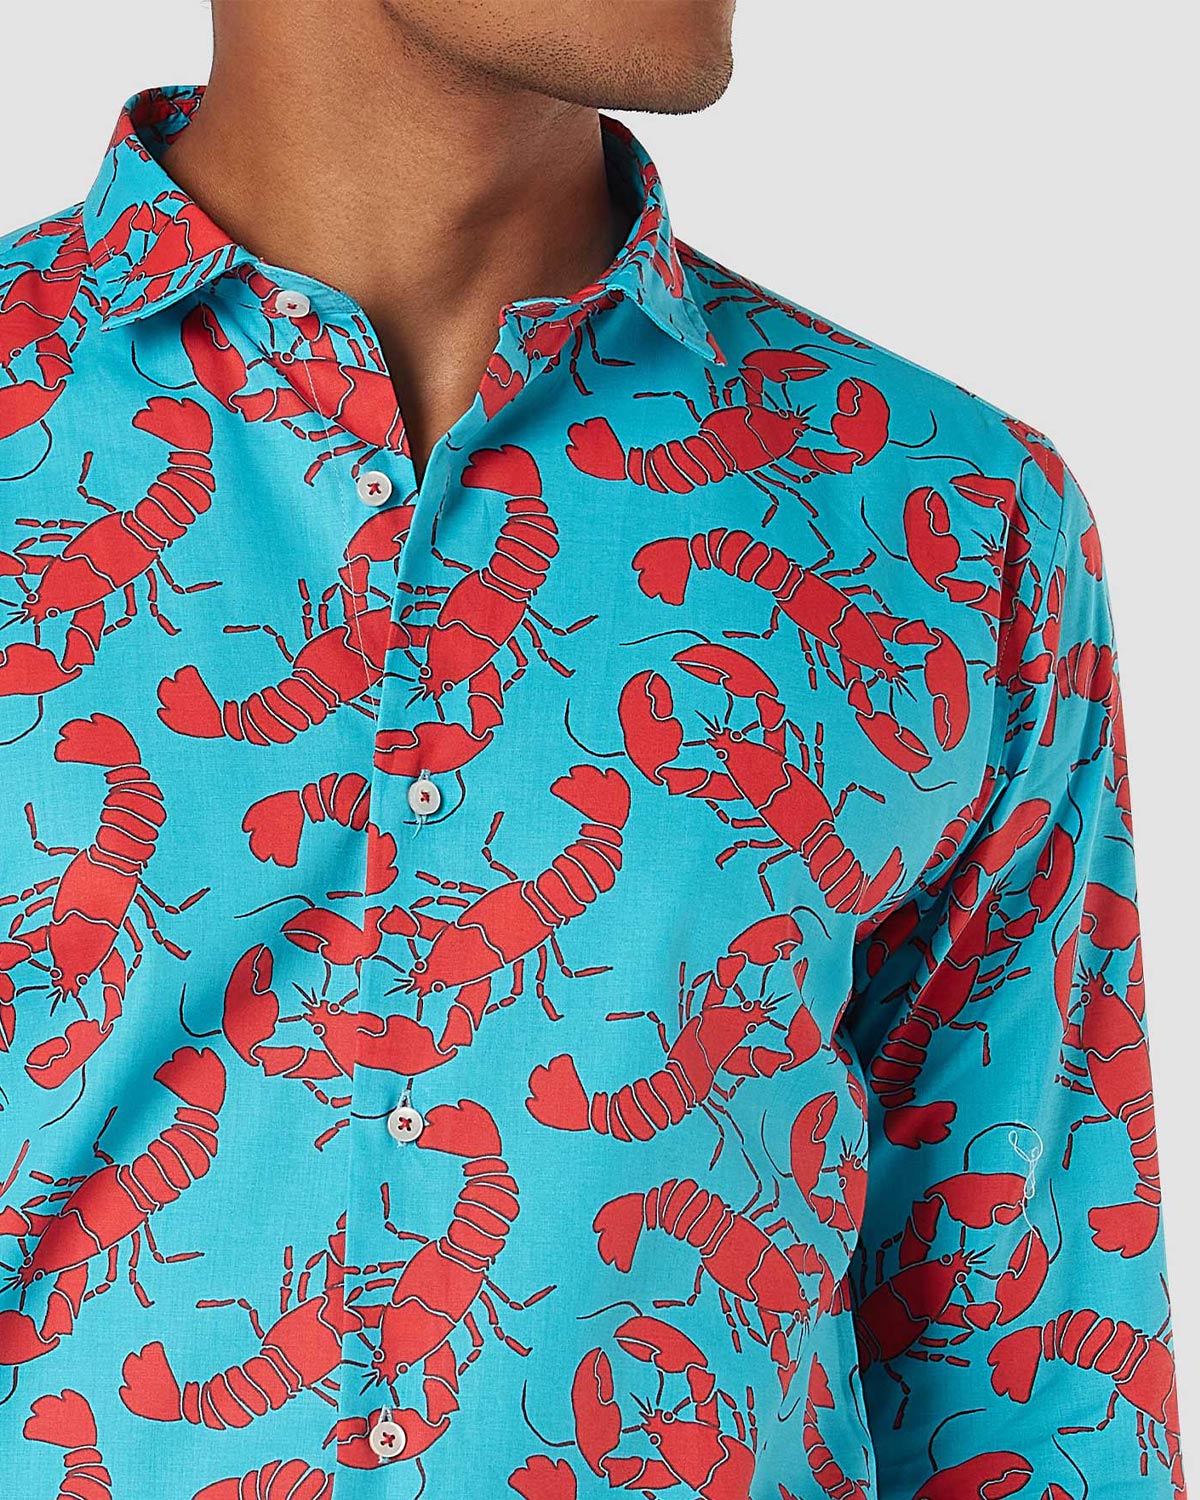 Bombay Shirt Company - Find Your Lobster Shirt